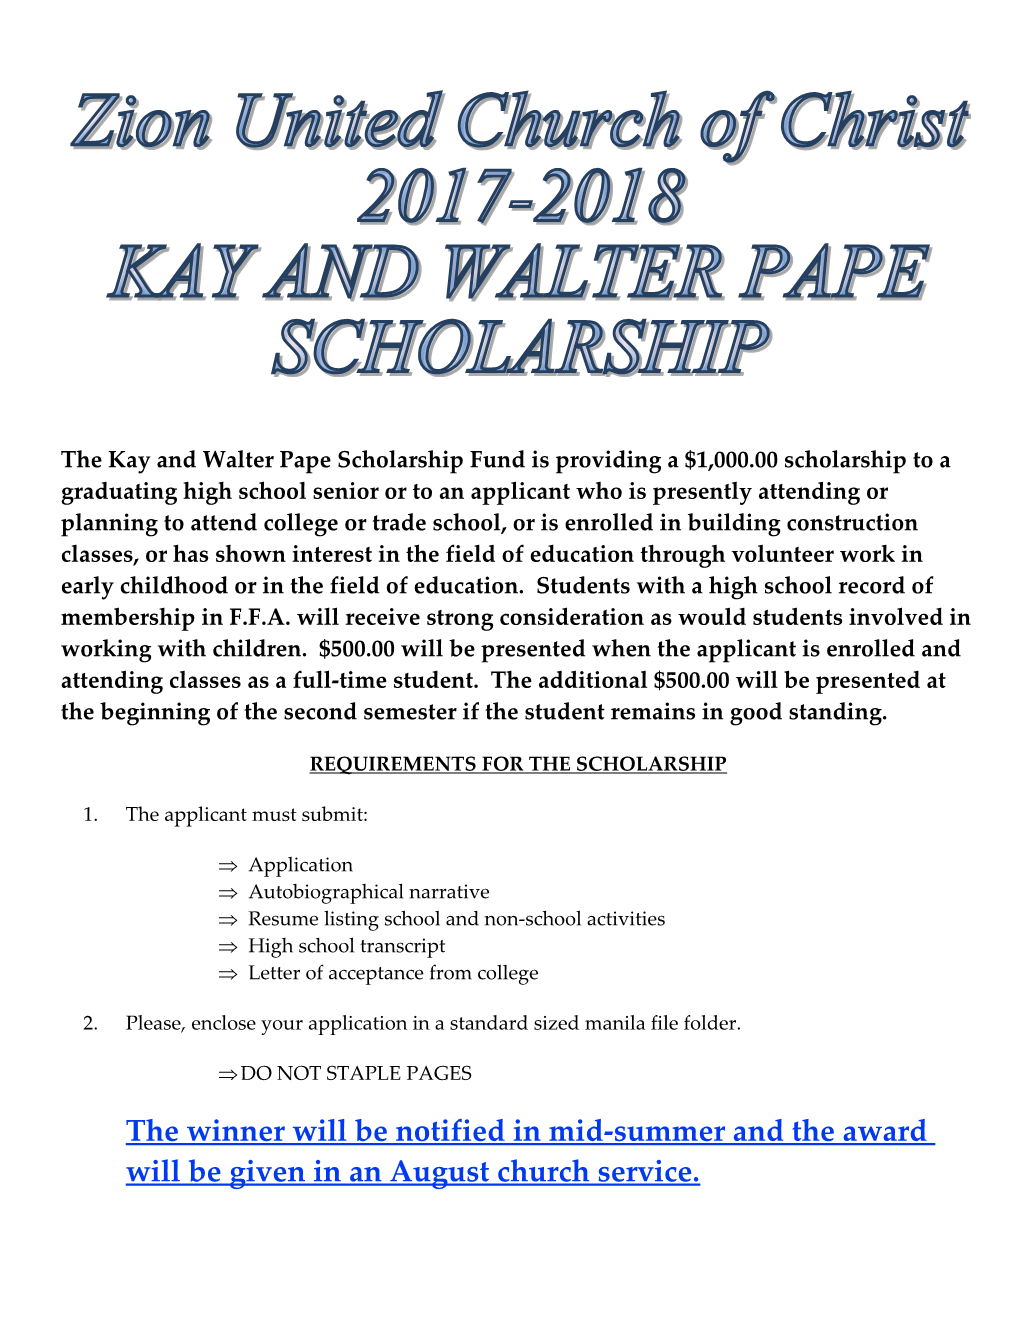 Requirements for the Scholarship